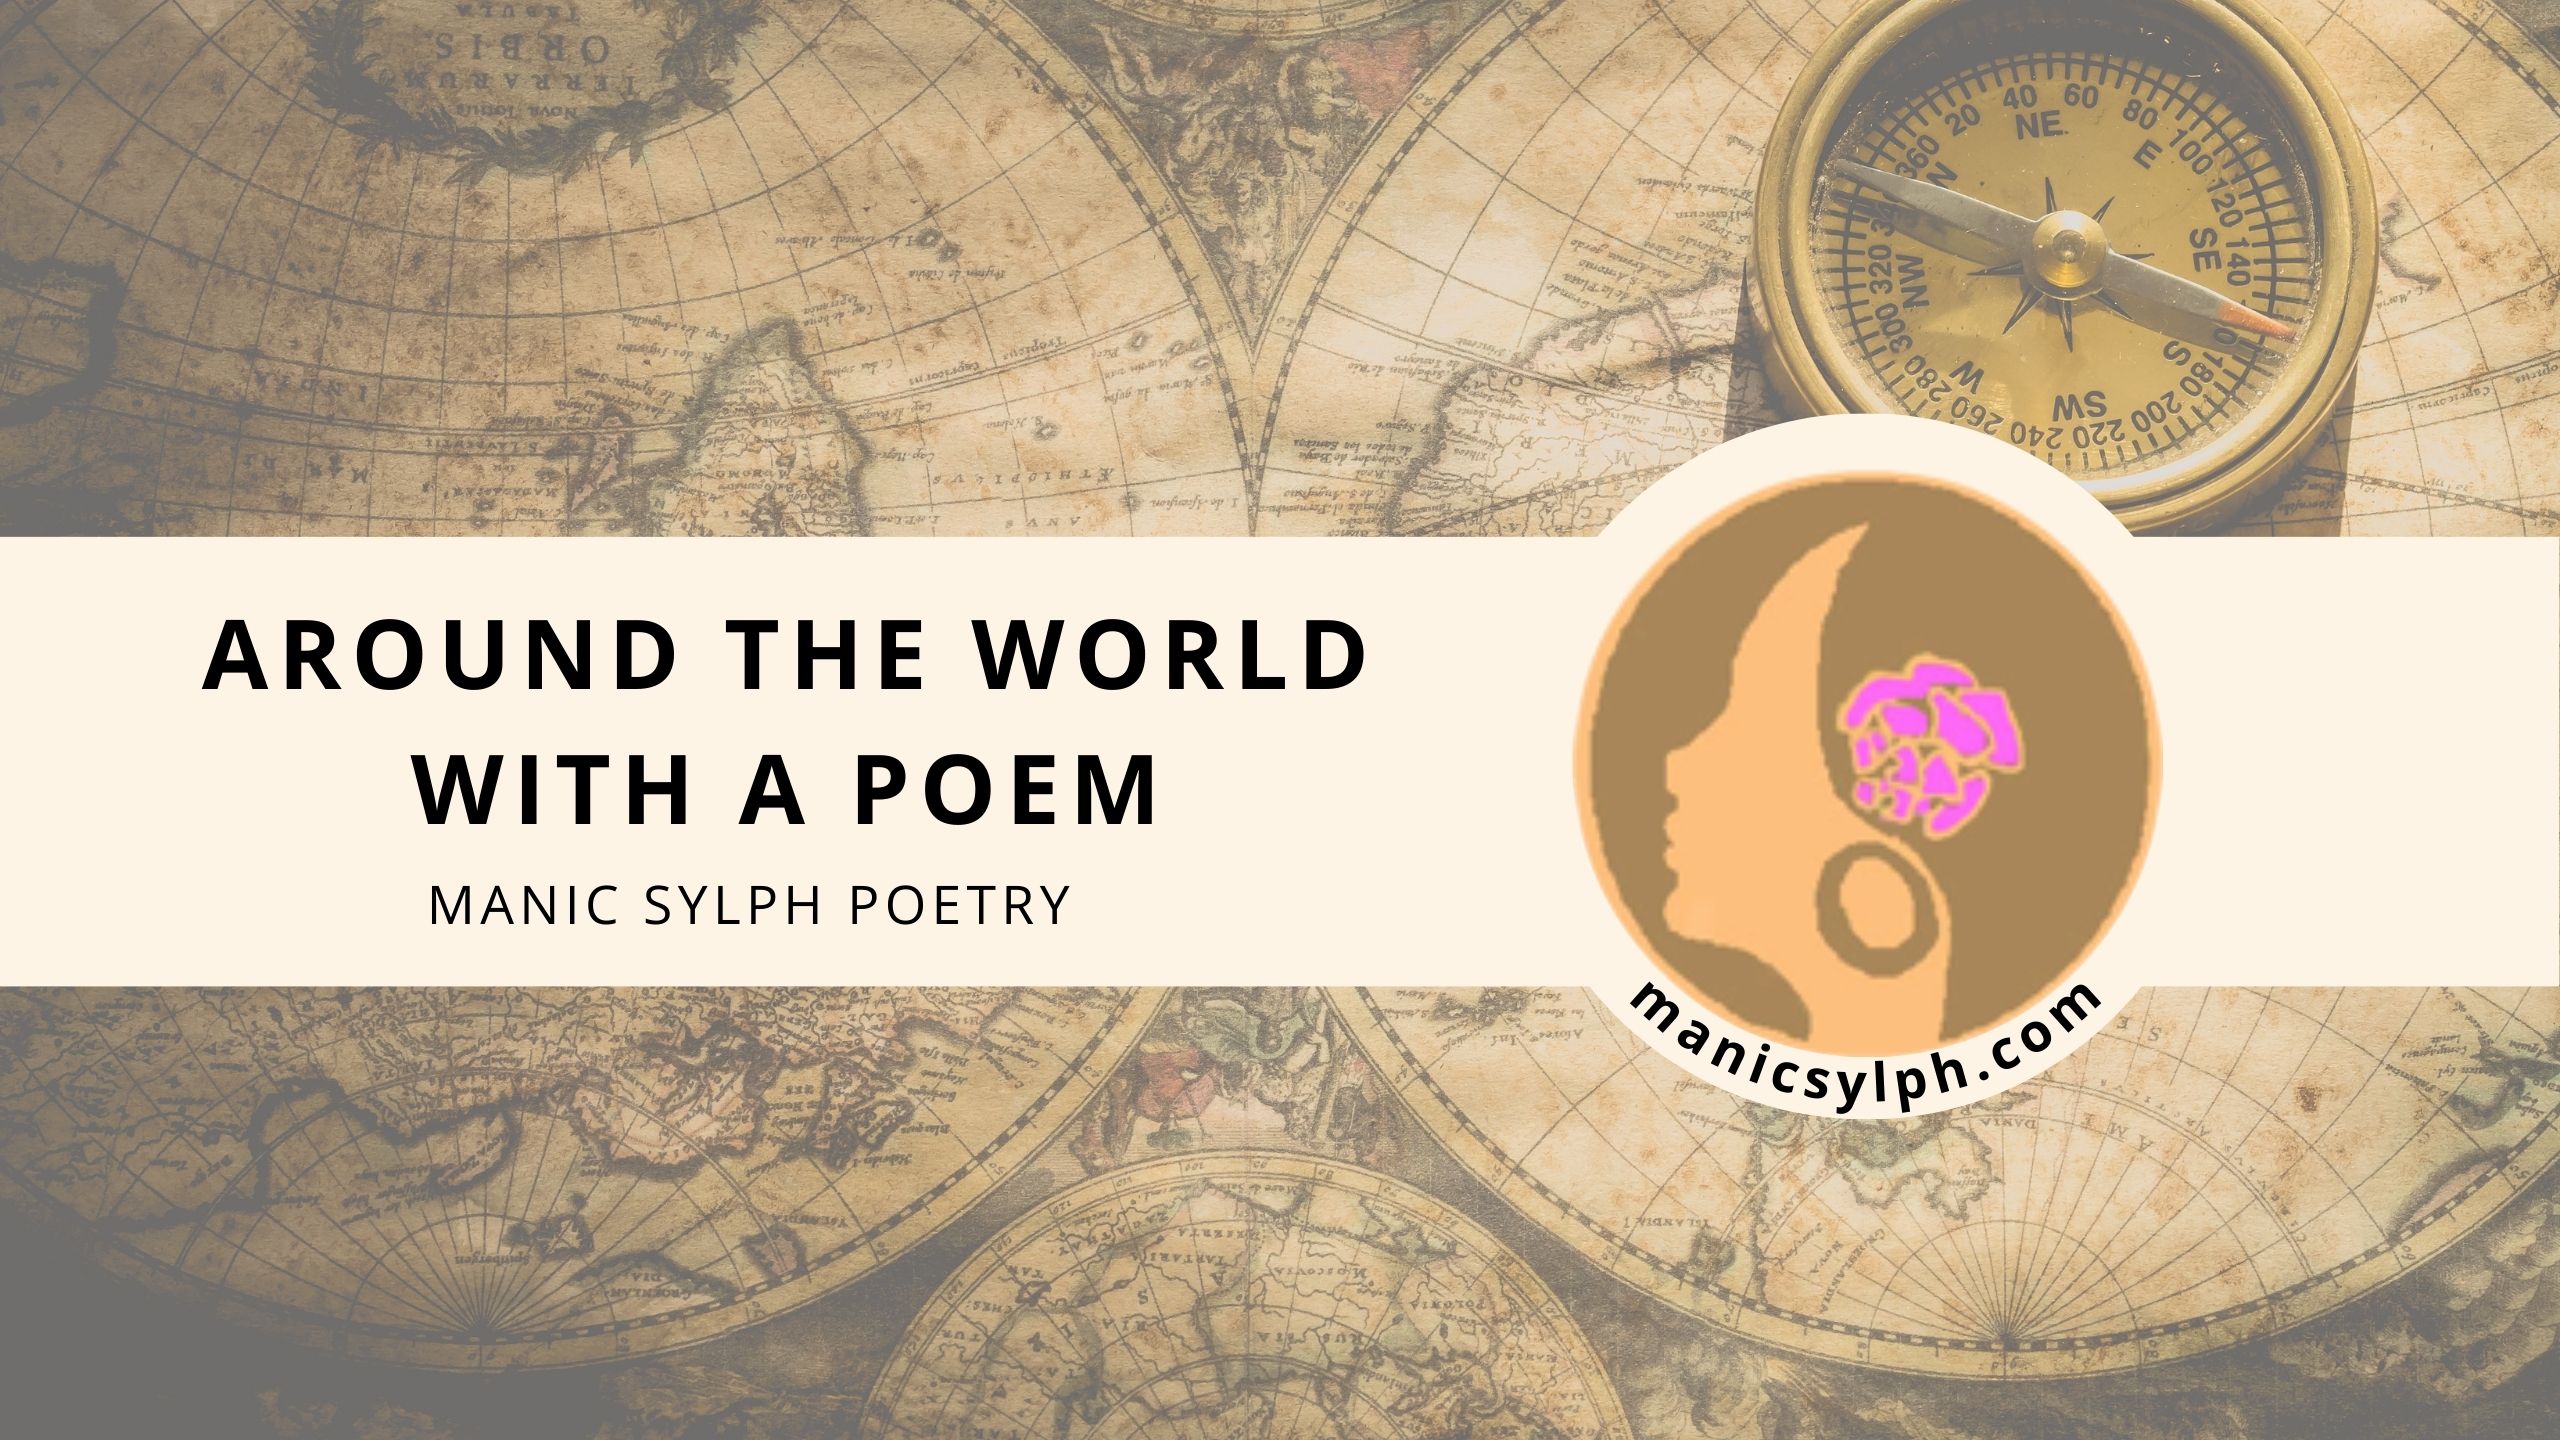 Around the world with a poem by Manic Sylph Poetry